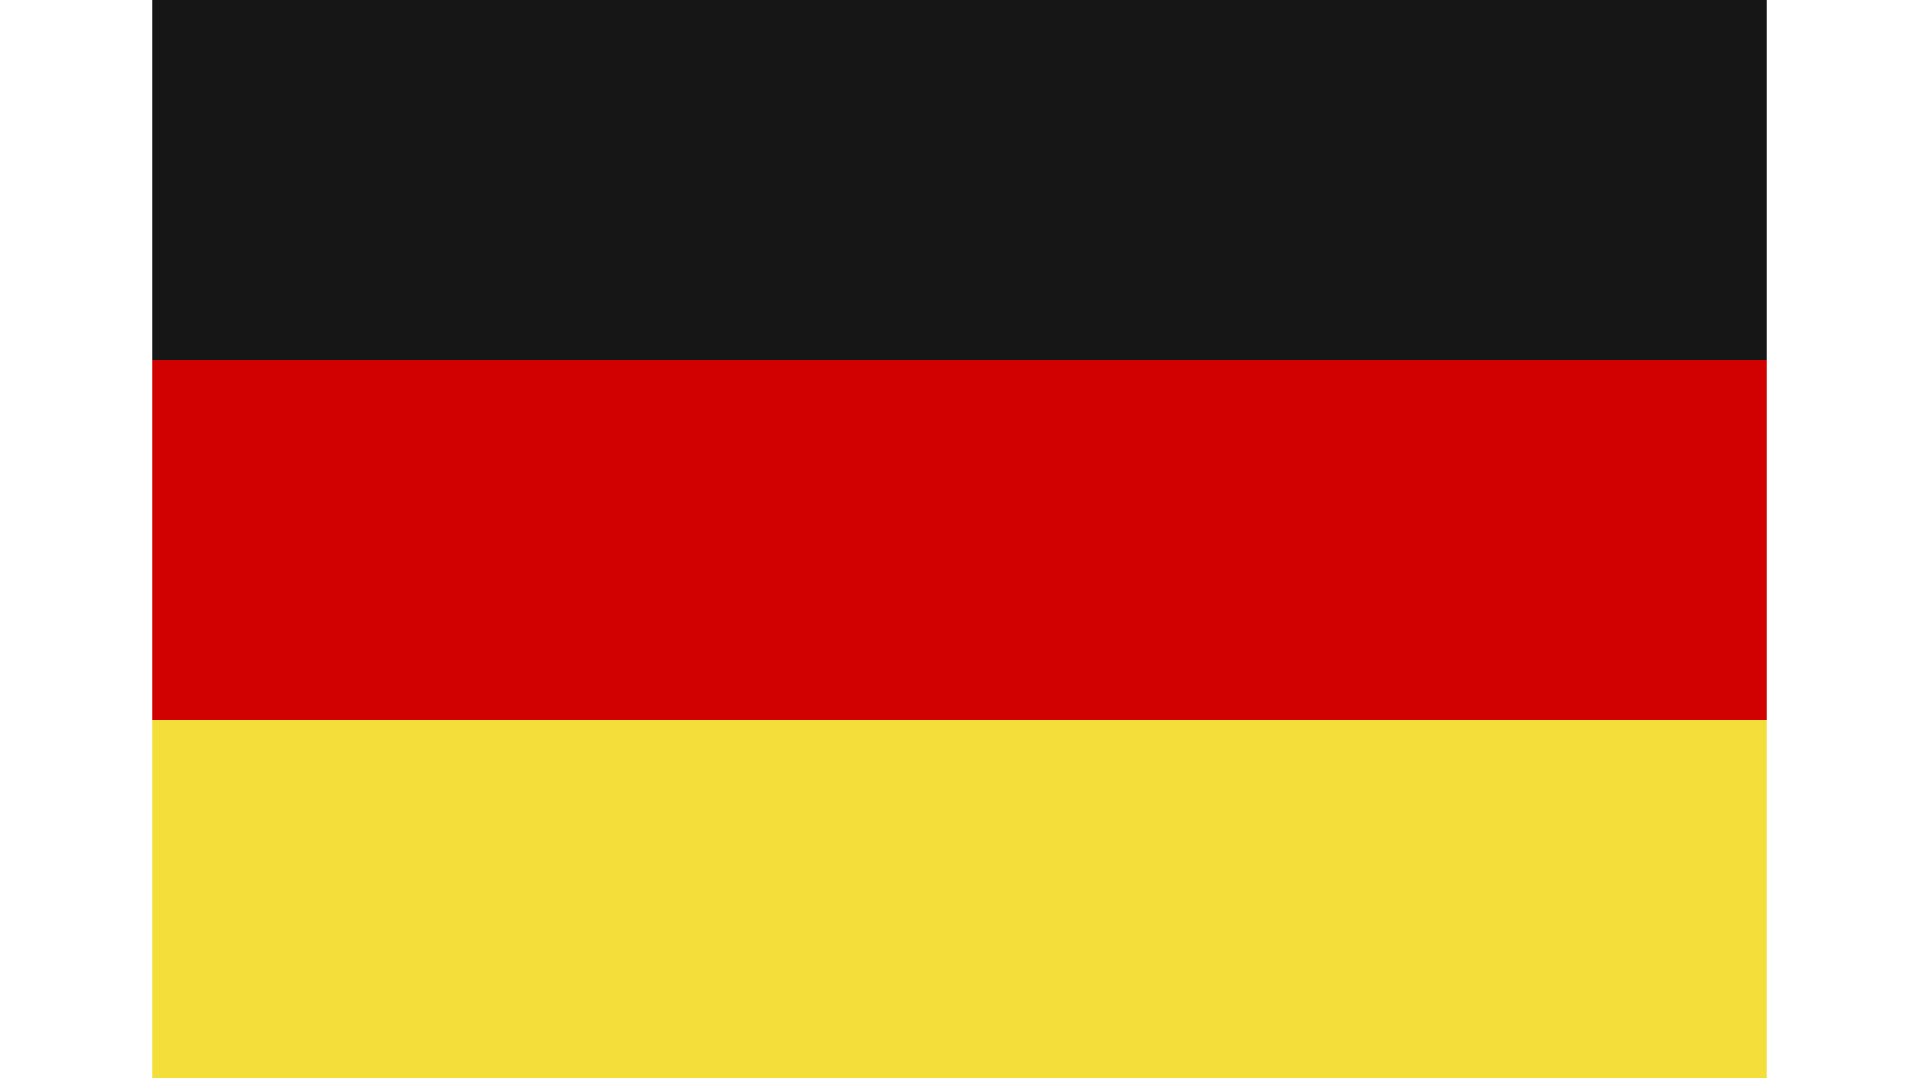 The flag of Germany with horizontal black red and yellow stripes.